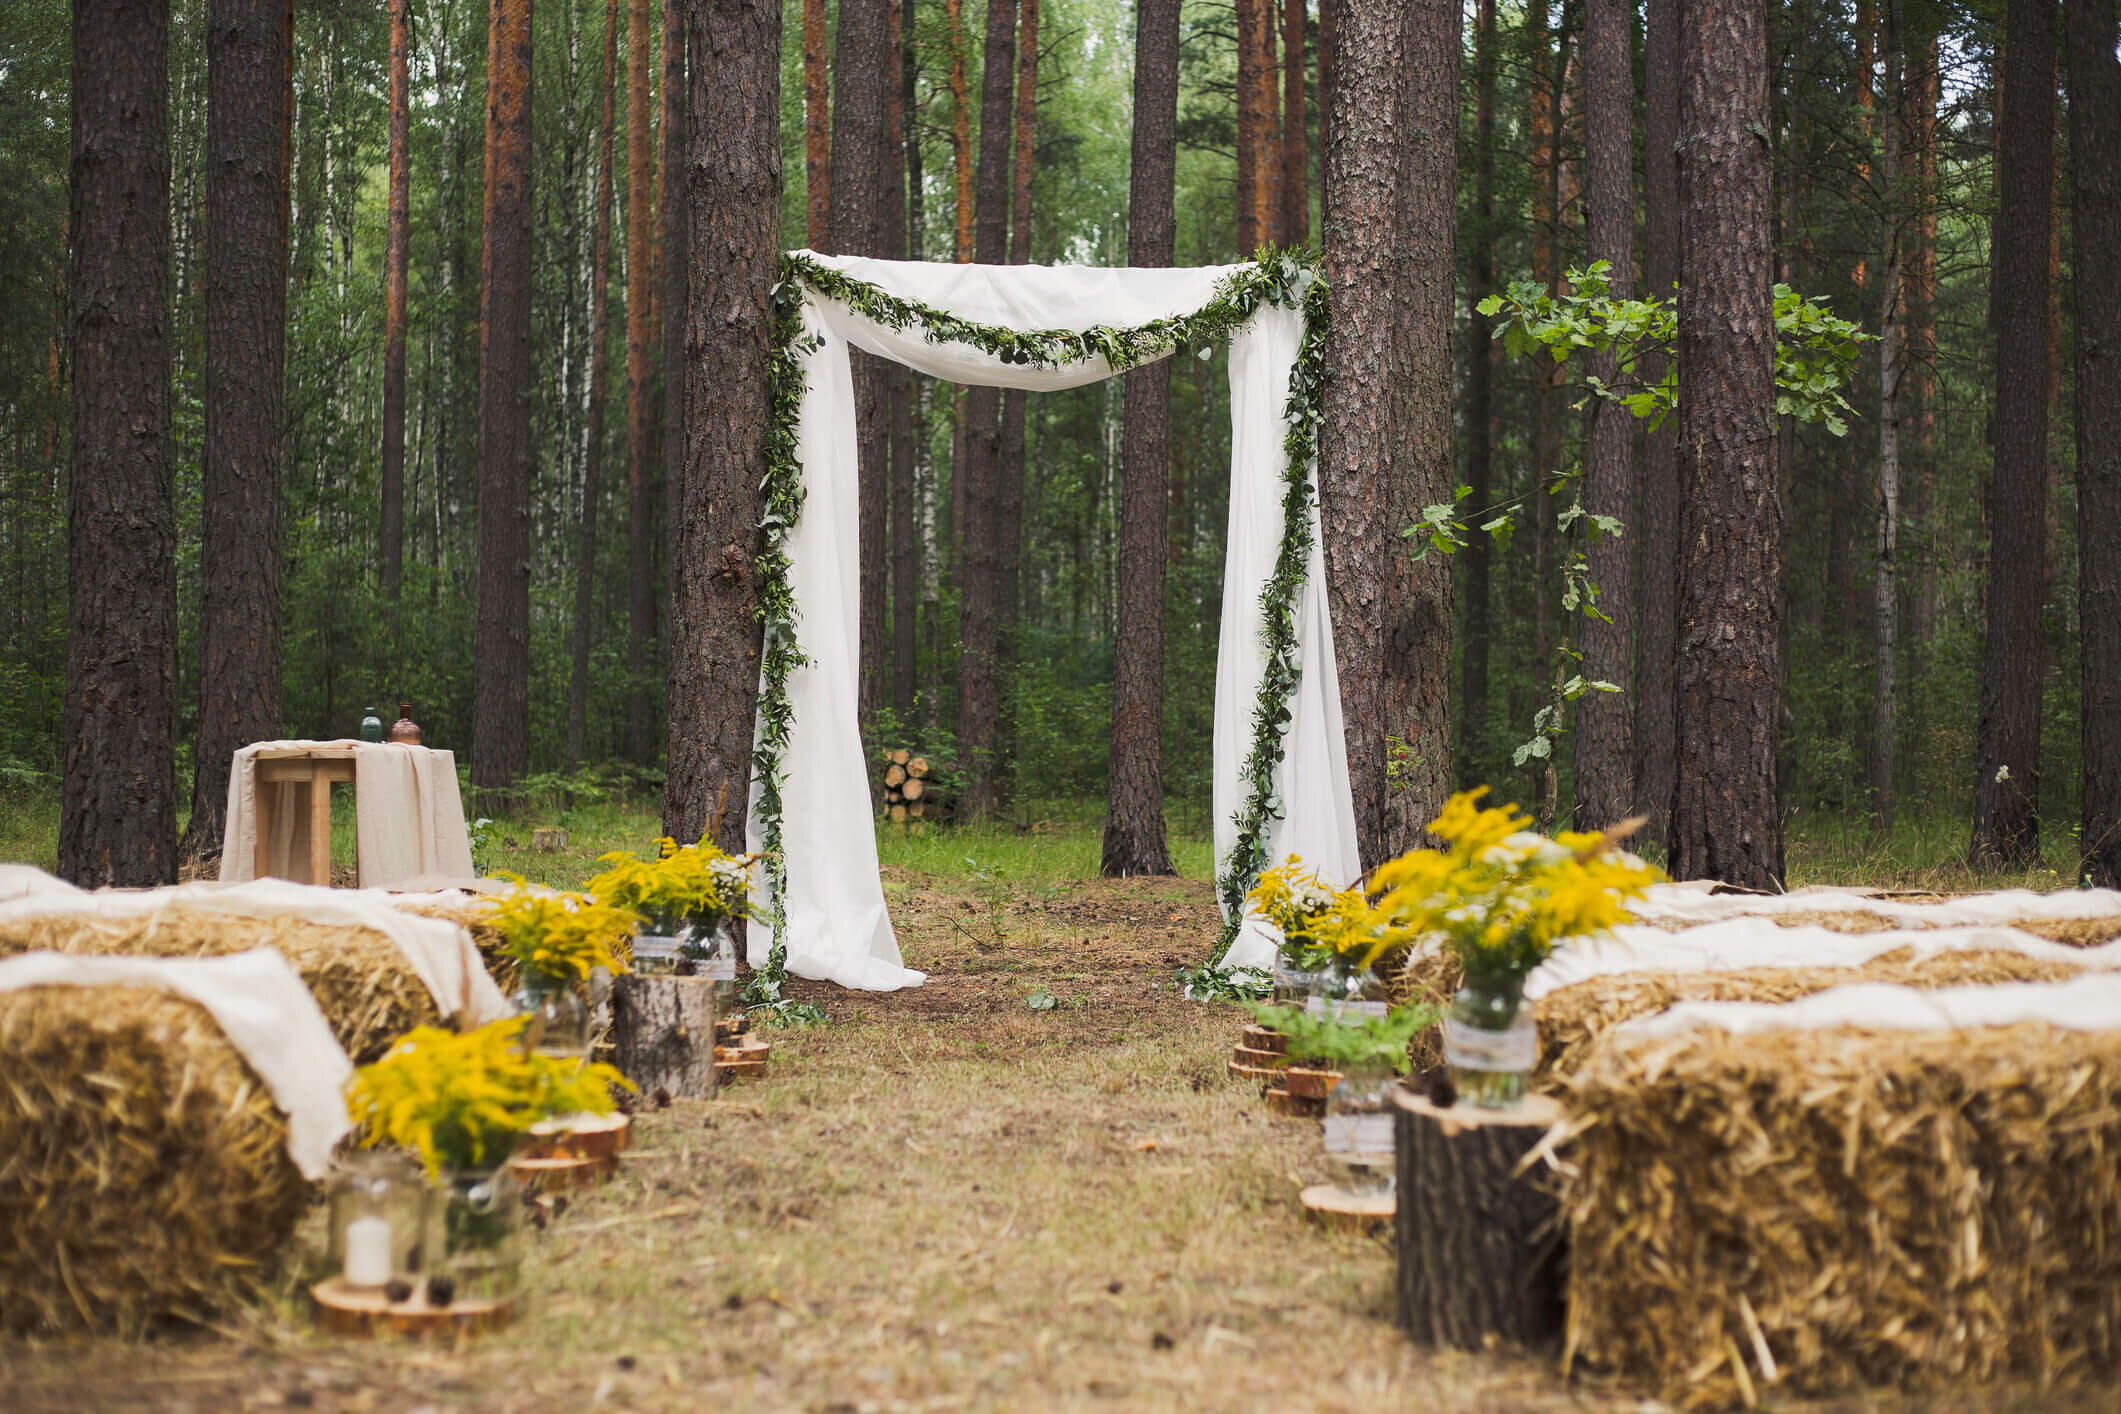 a décor for a wedding in a forest | Wedifys